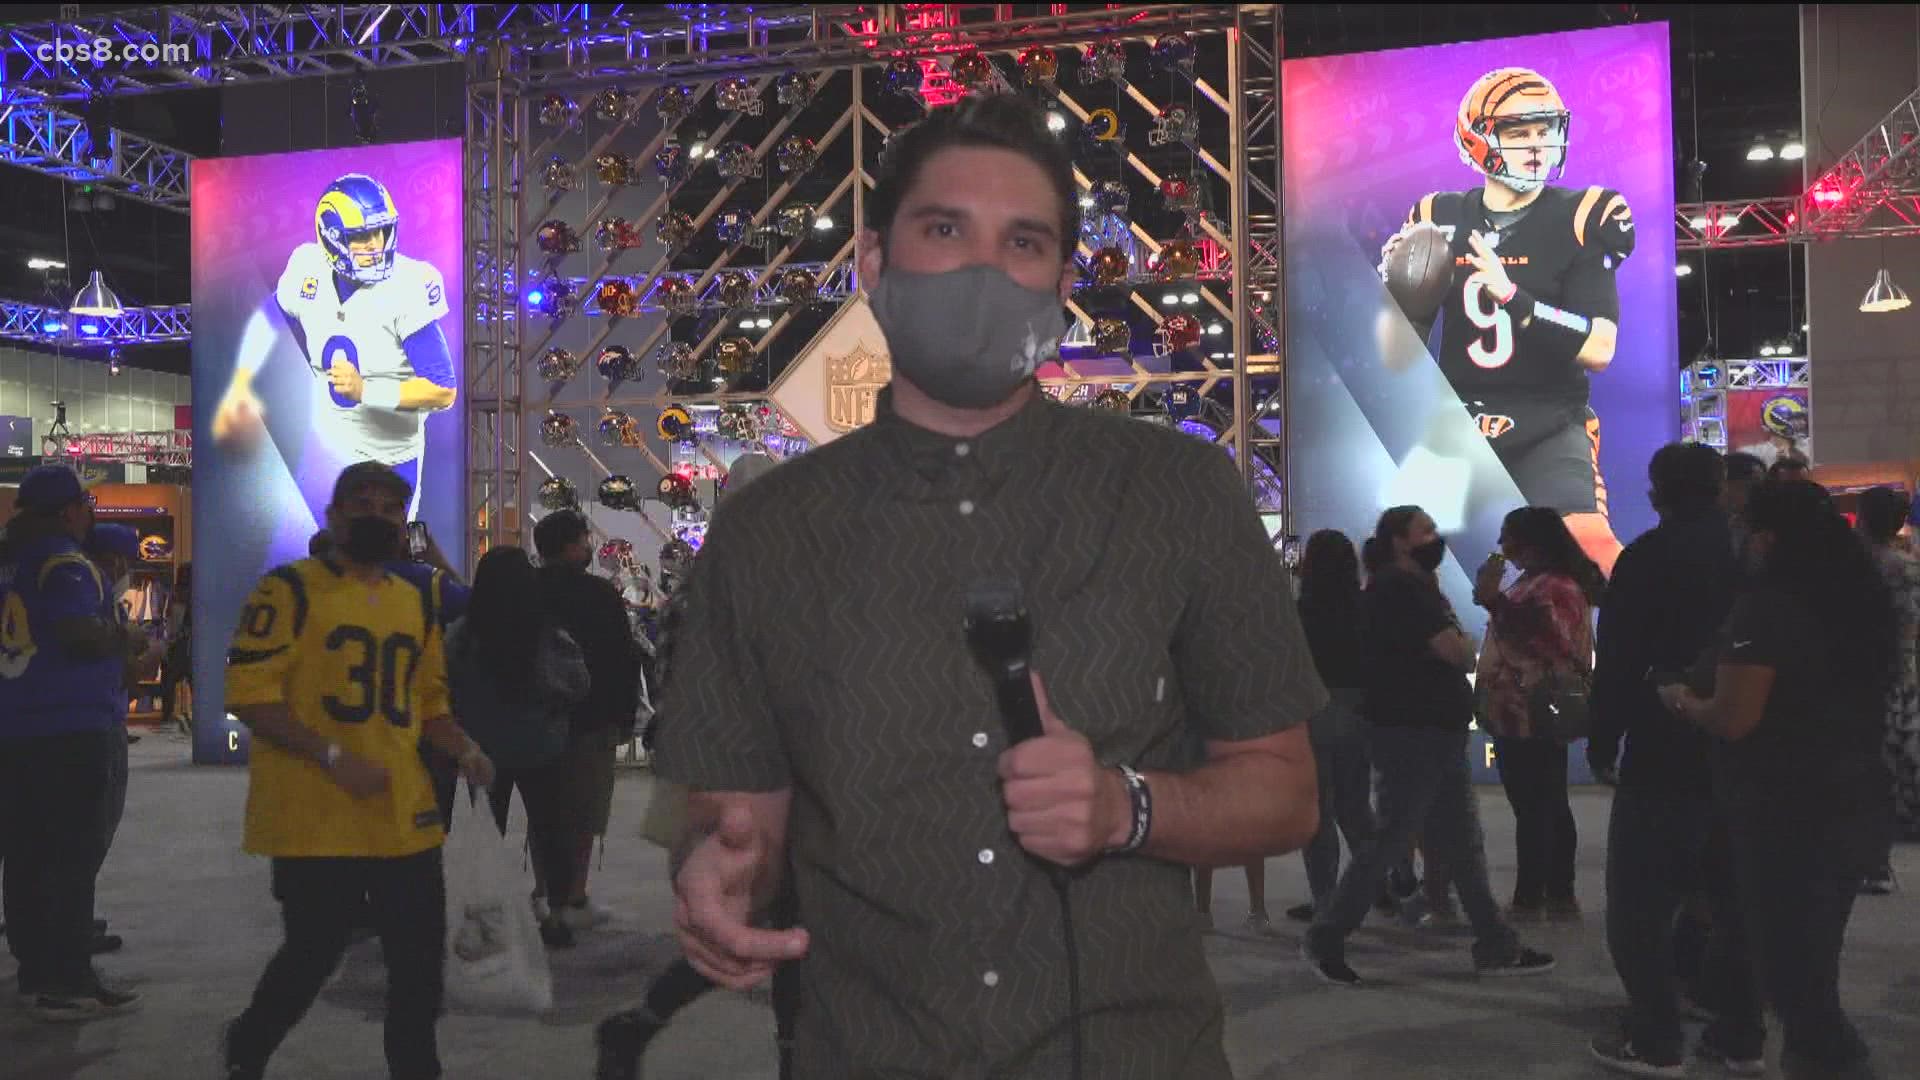 Sports reporter Jake Garegnani shares first day of NFL experience in LA.